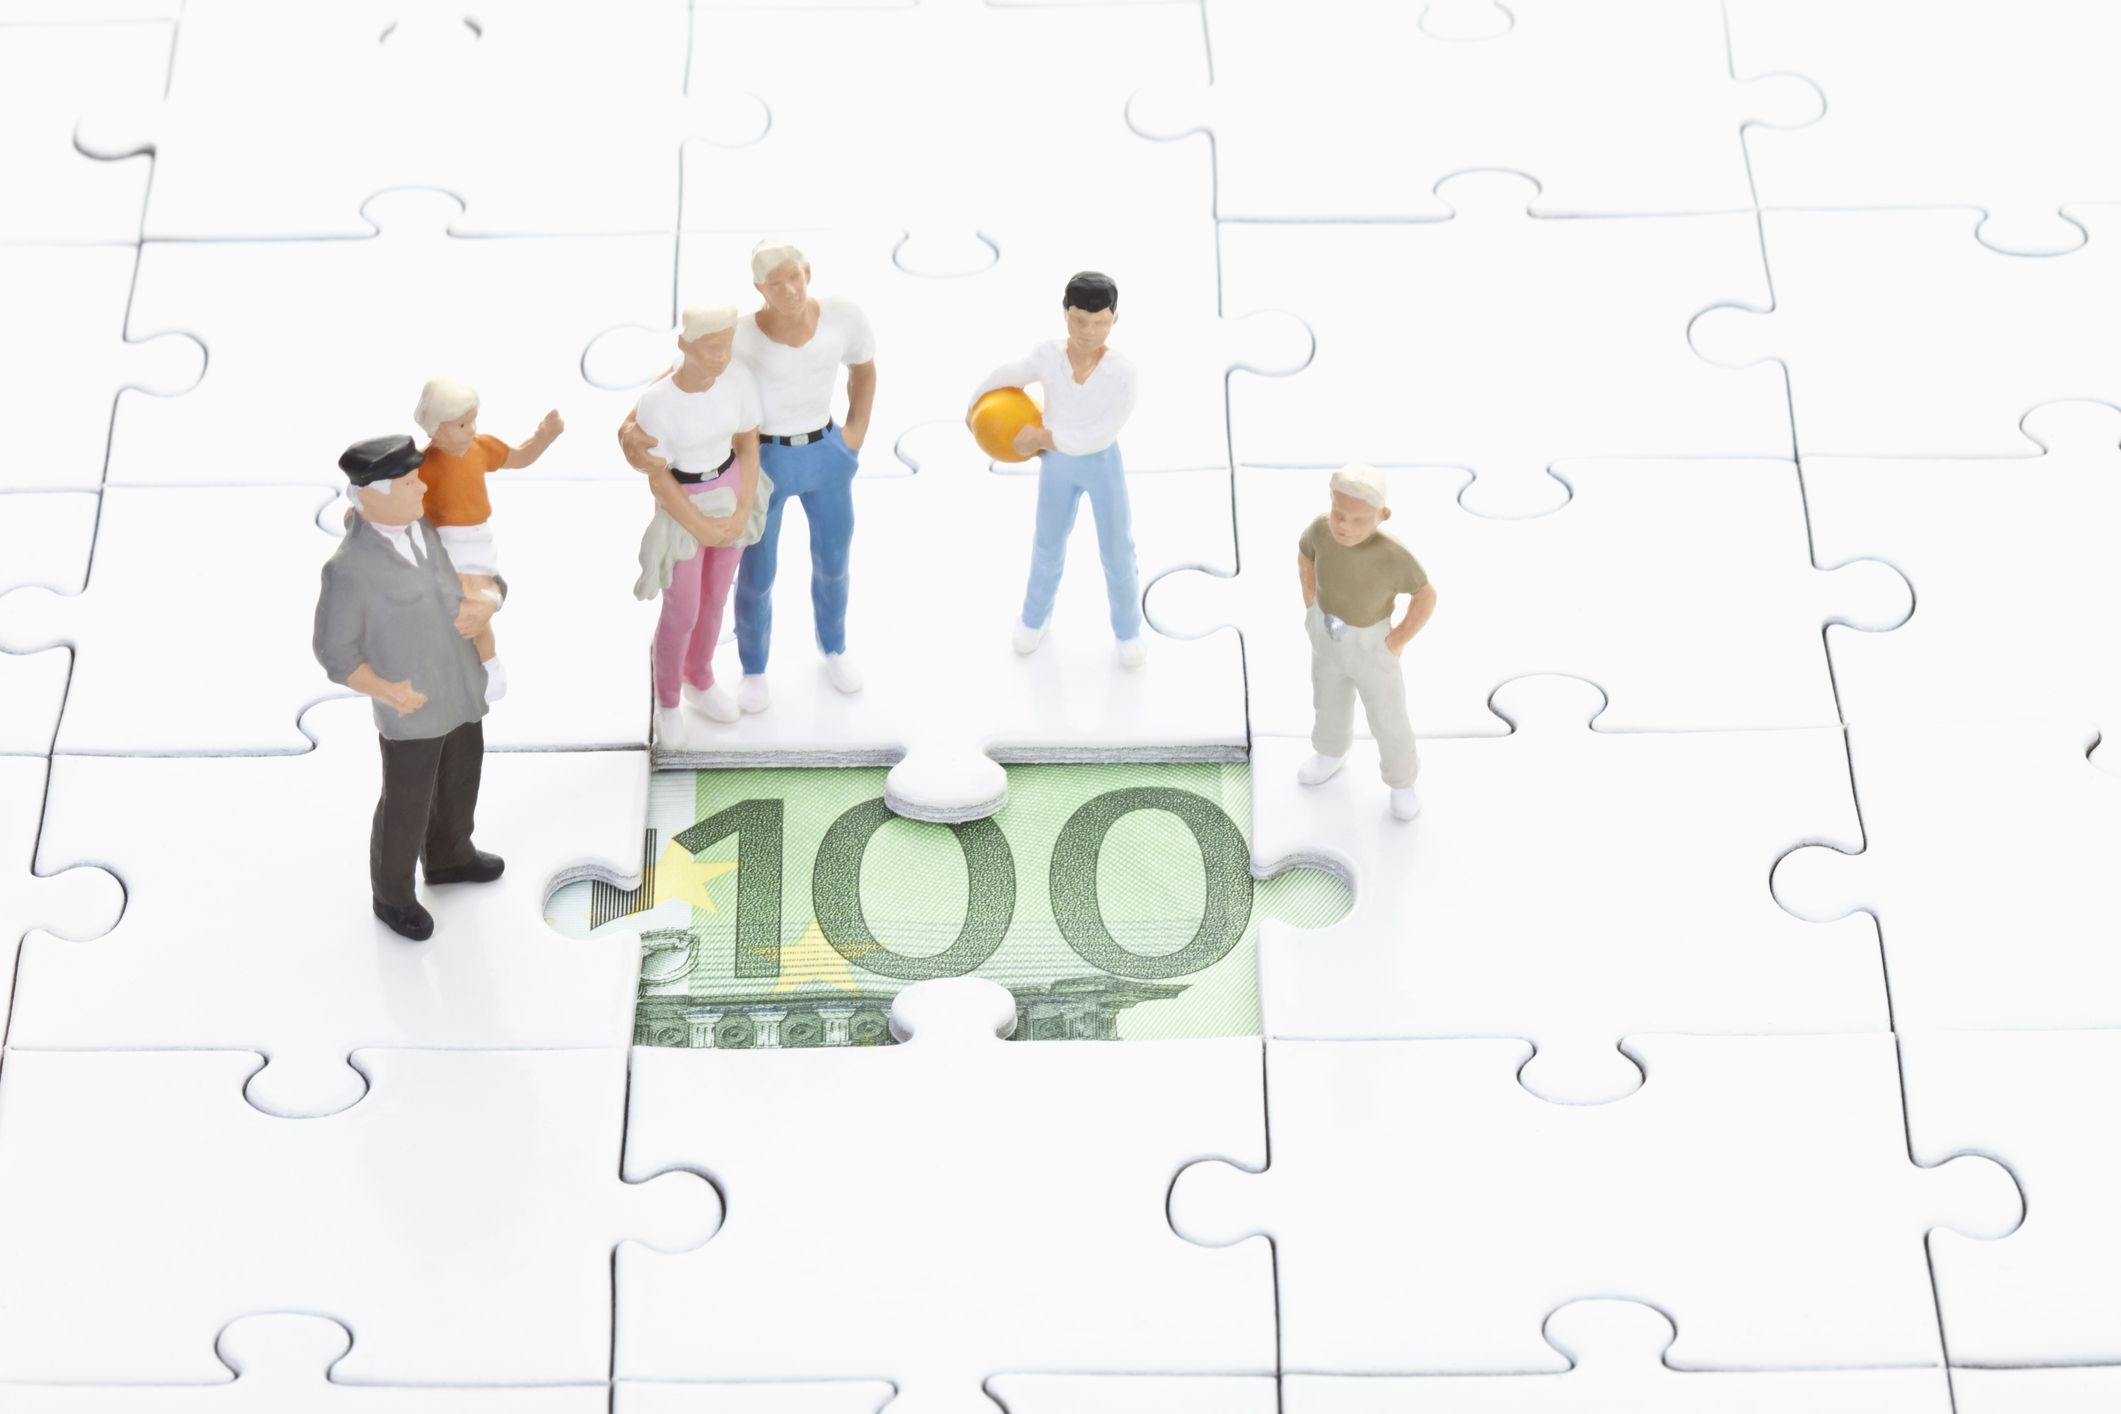 A group of doll figures standing around a money puzzle piece indicating a Central Bank's monetary policy.